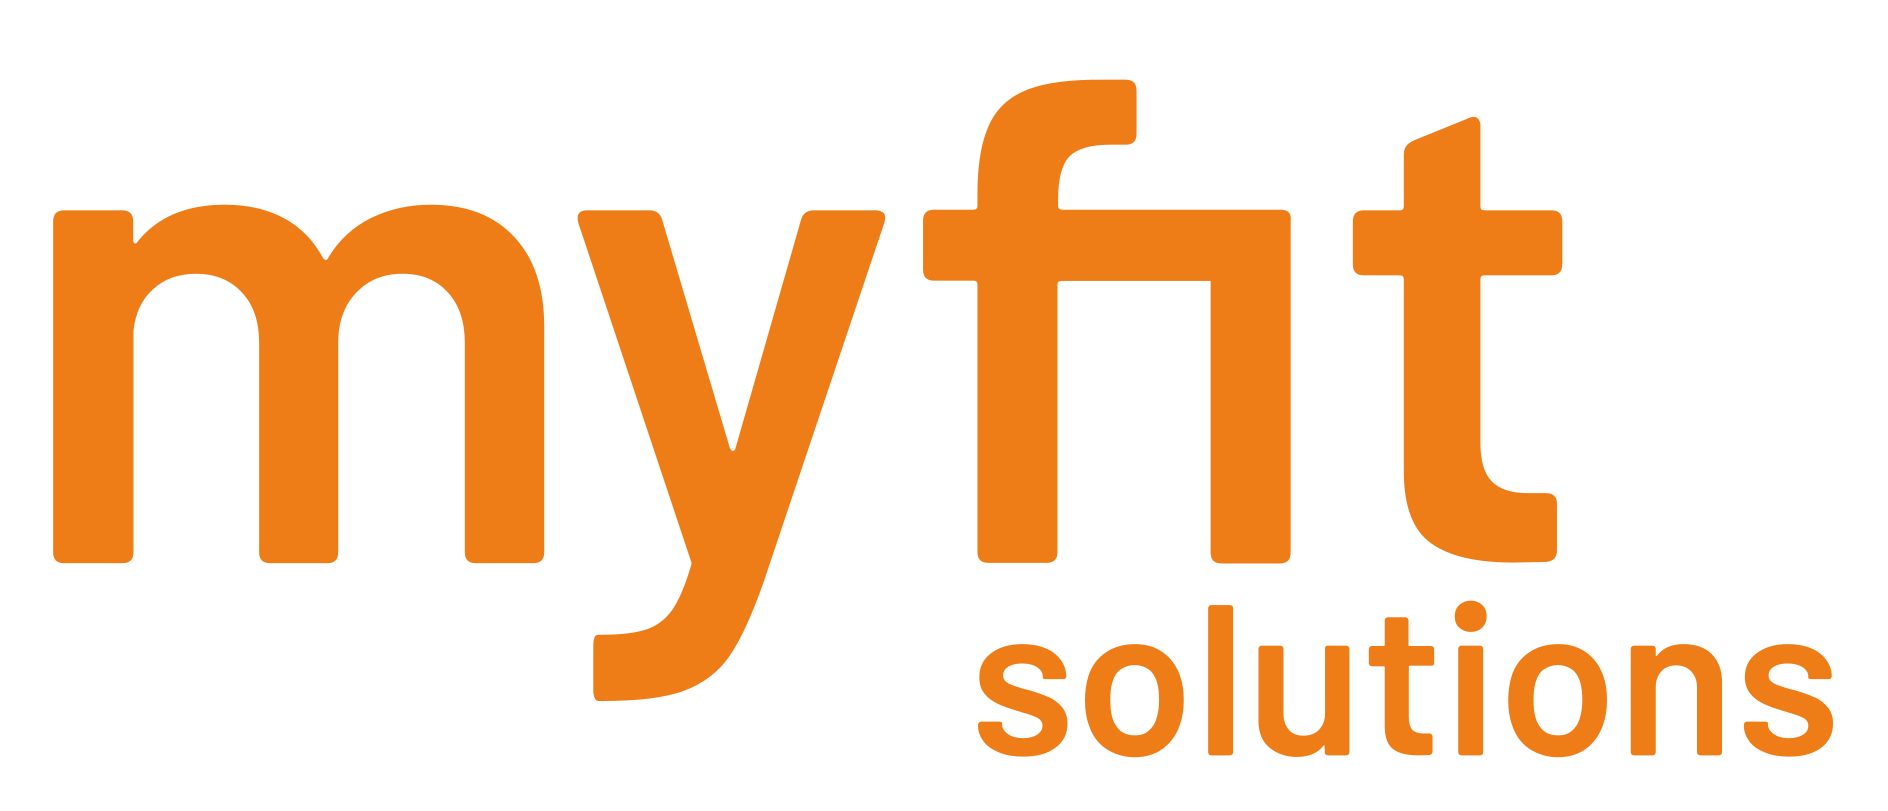 MyFit Solutions